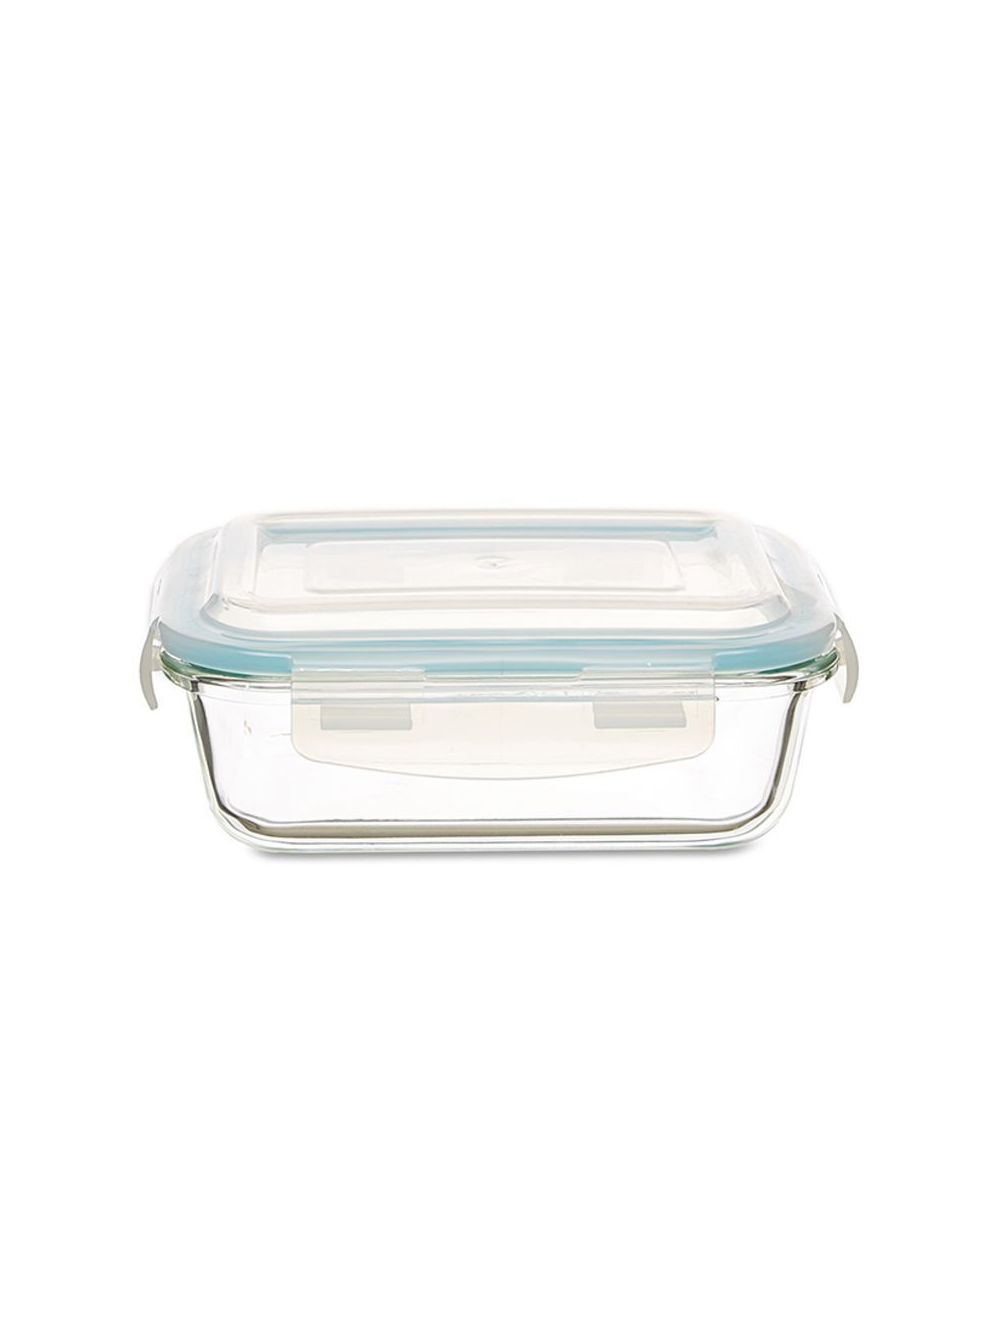 Neoflam Cloc 0.37 Litre Glass Storage - Clear